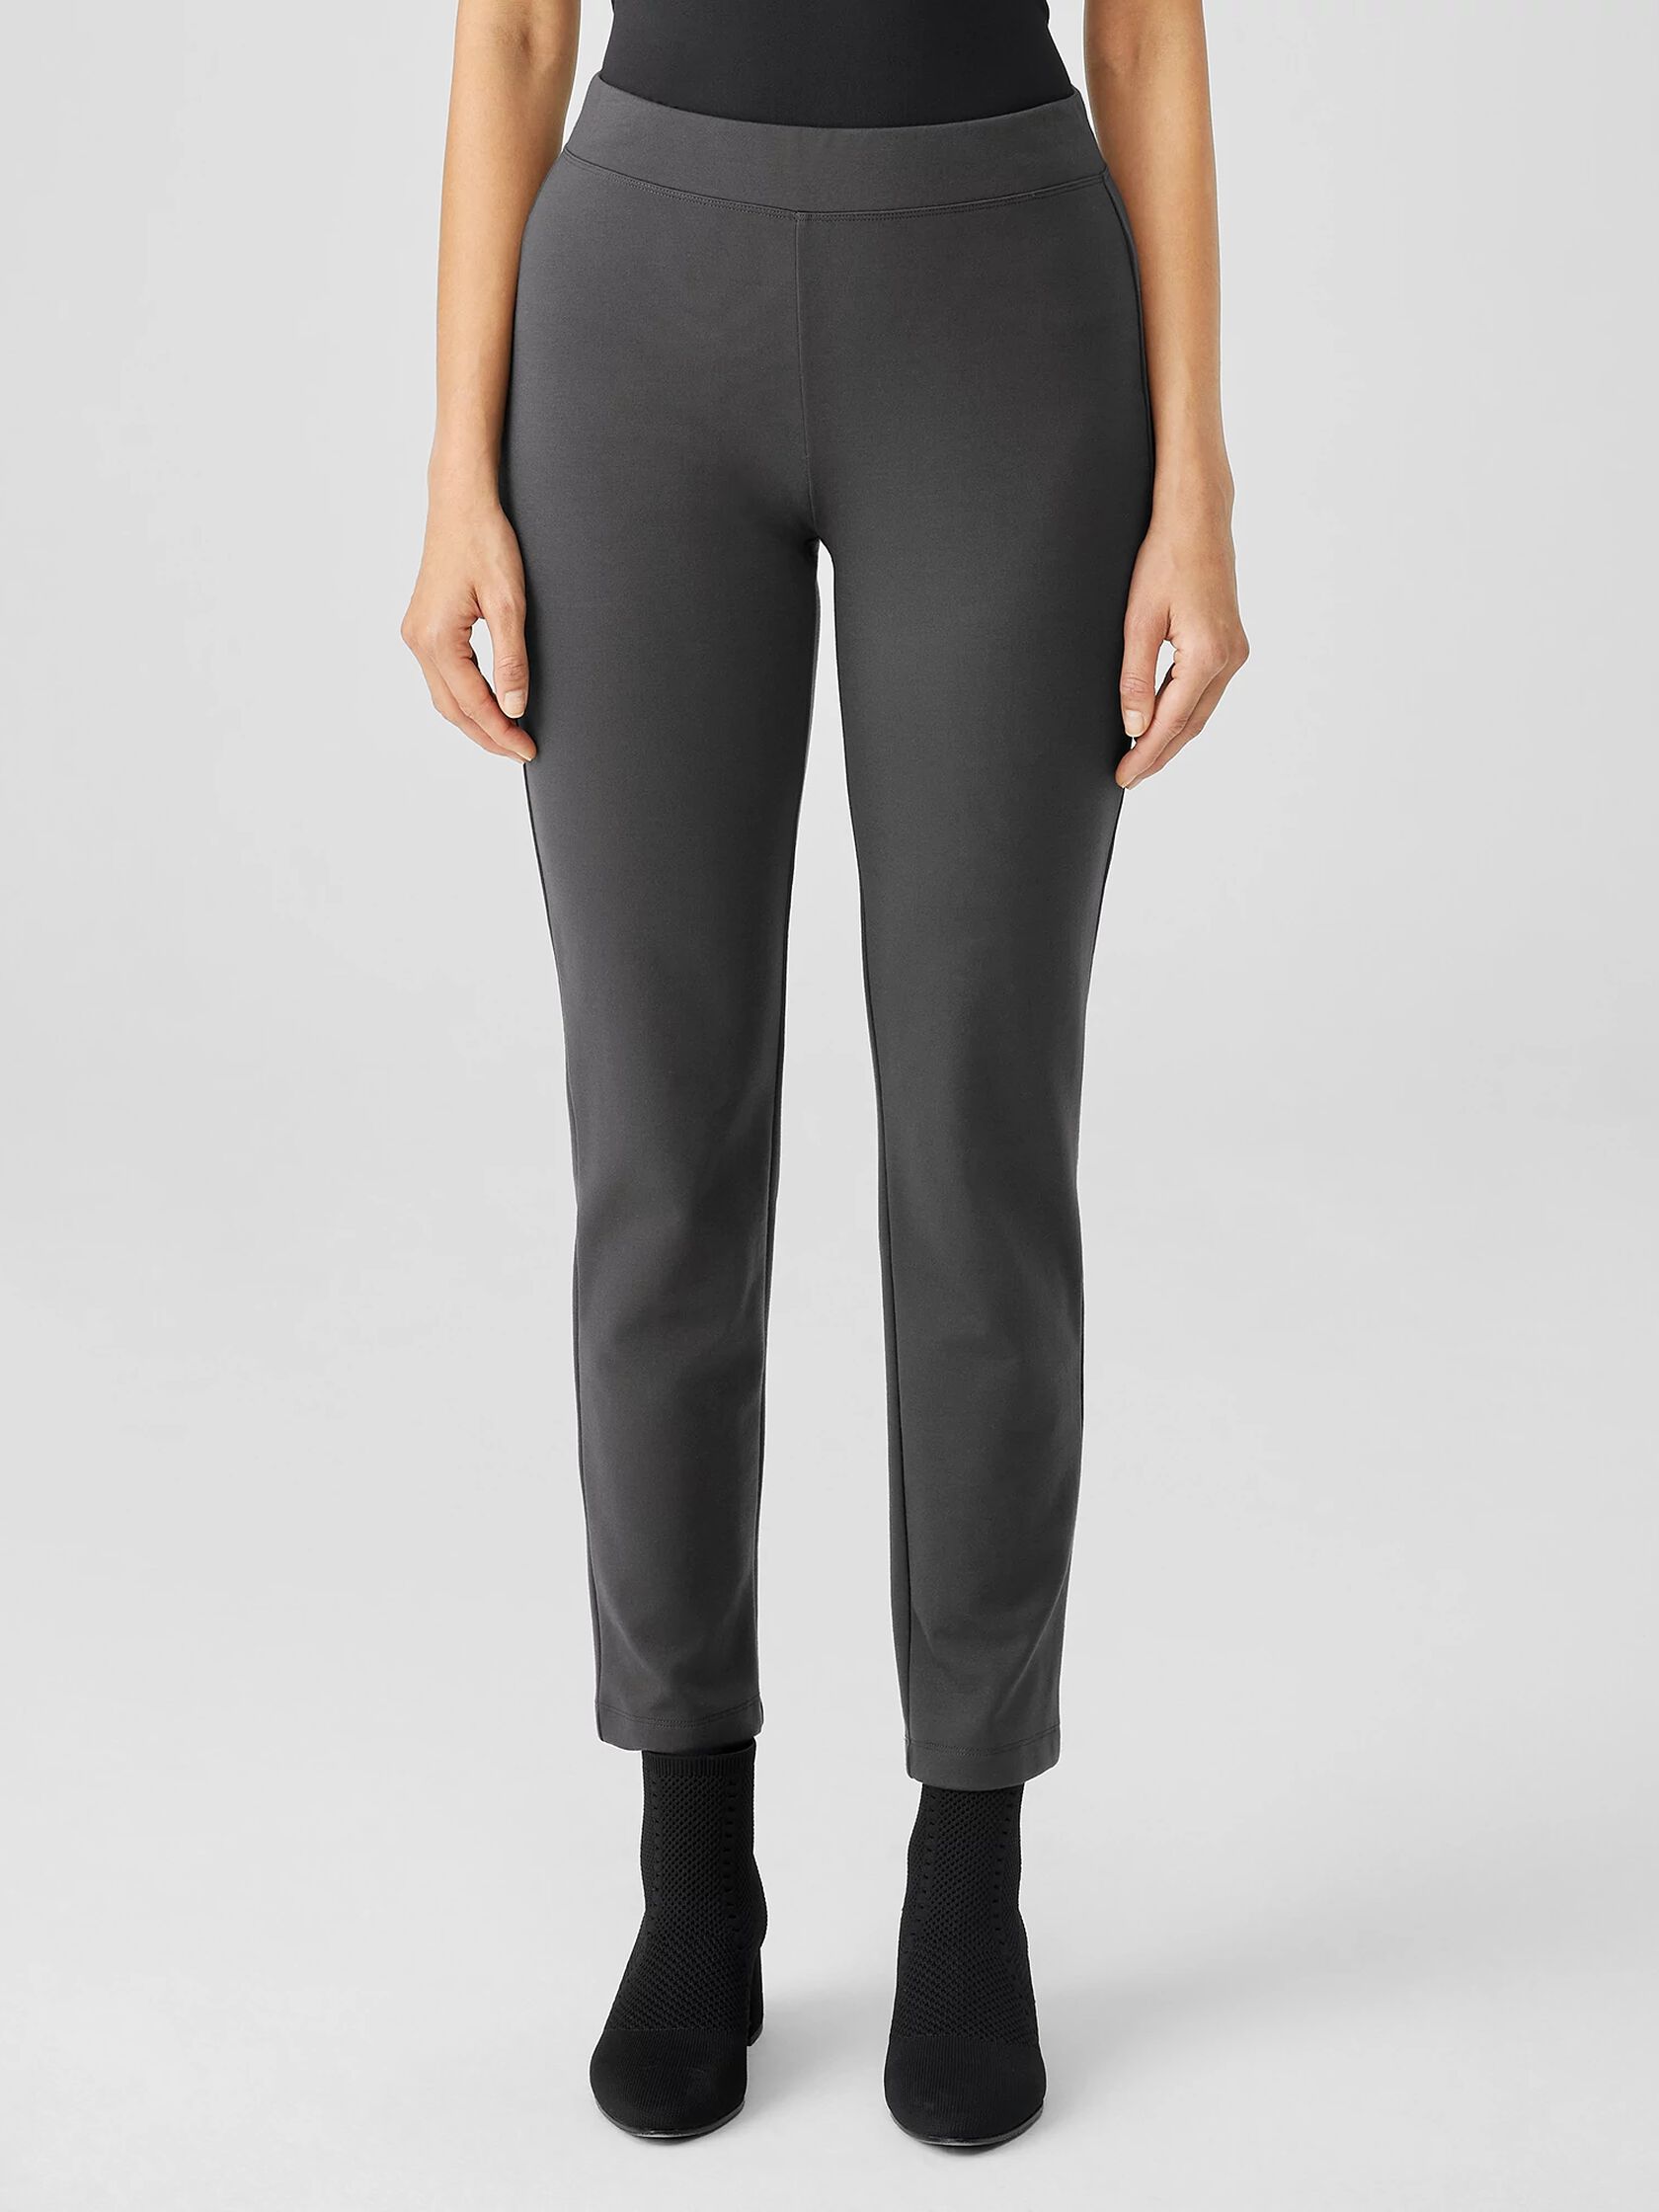 Eileen Fisher Essentials Stretch Jersey Ankle Pull-On Leggings